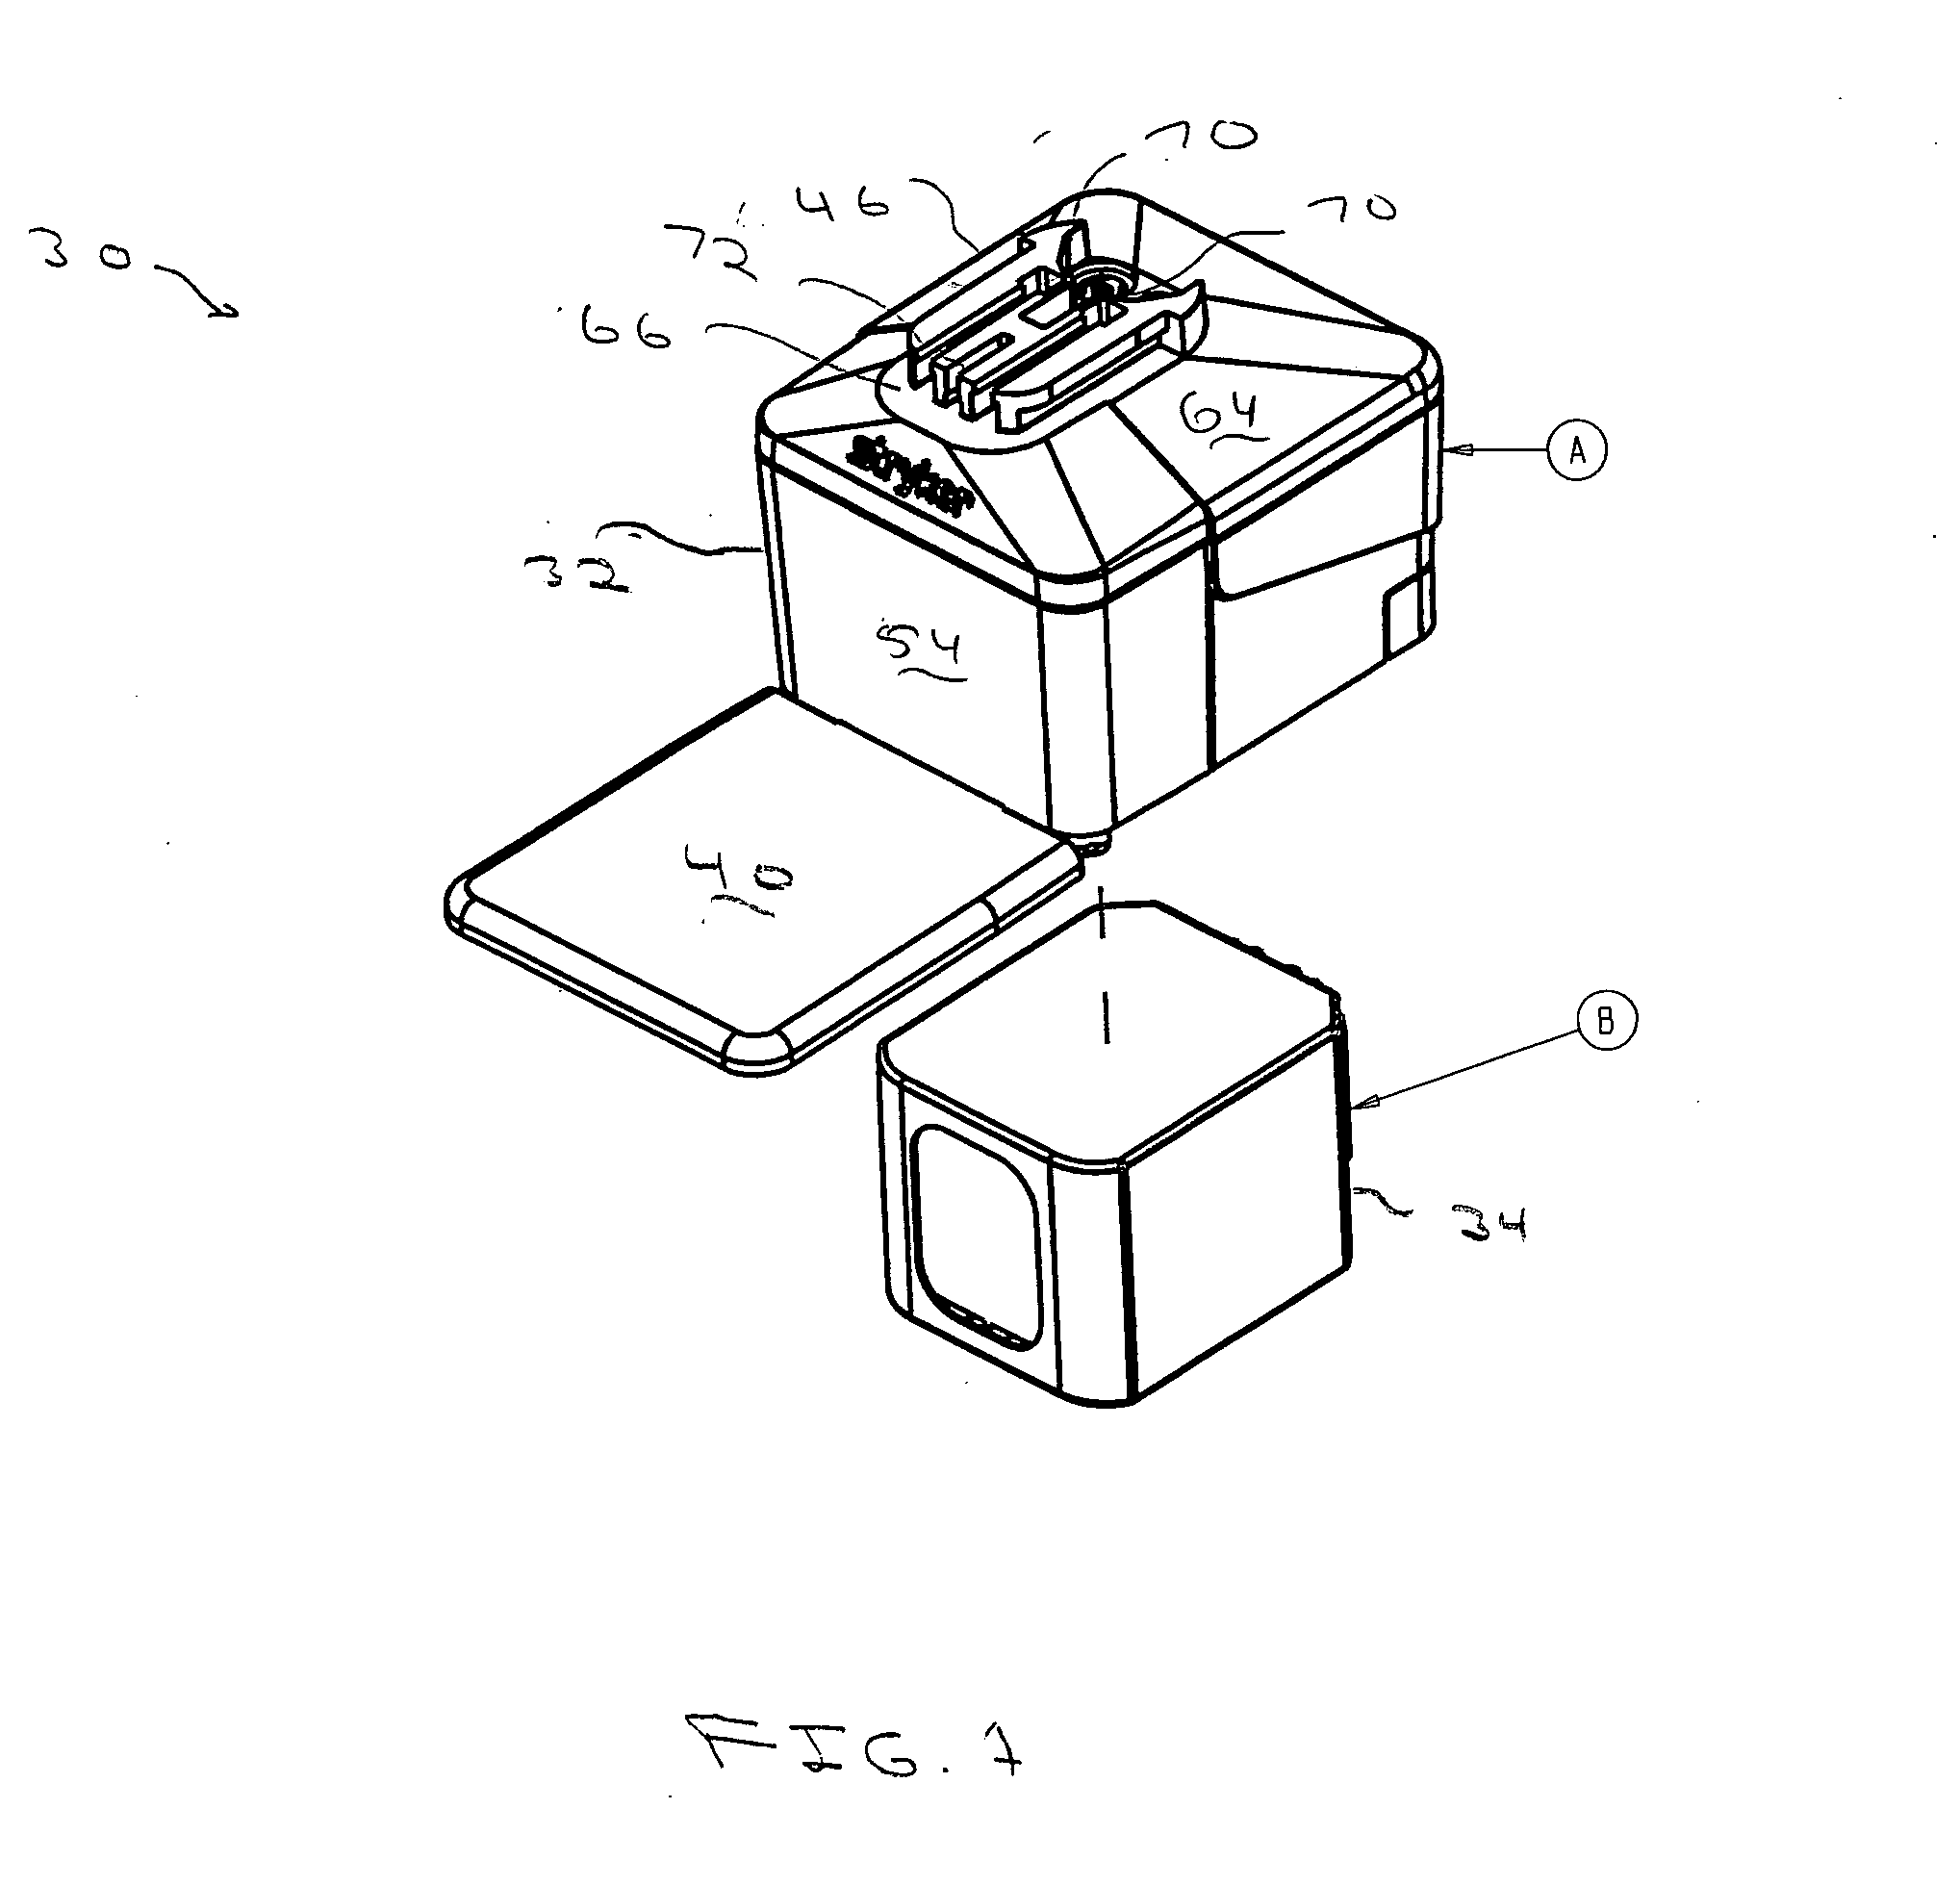 Aseptic battery assembly with removable cell cluster